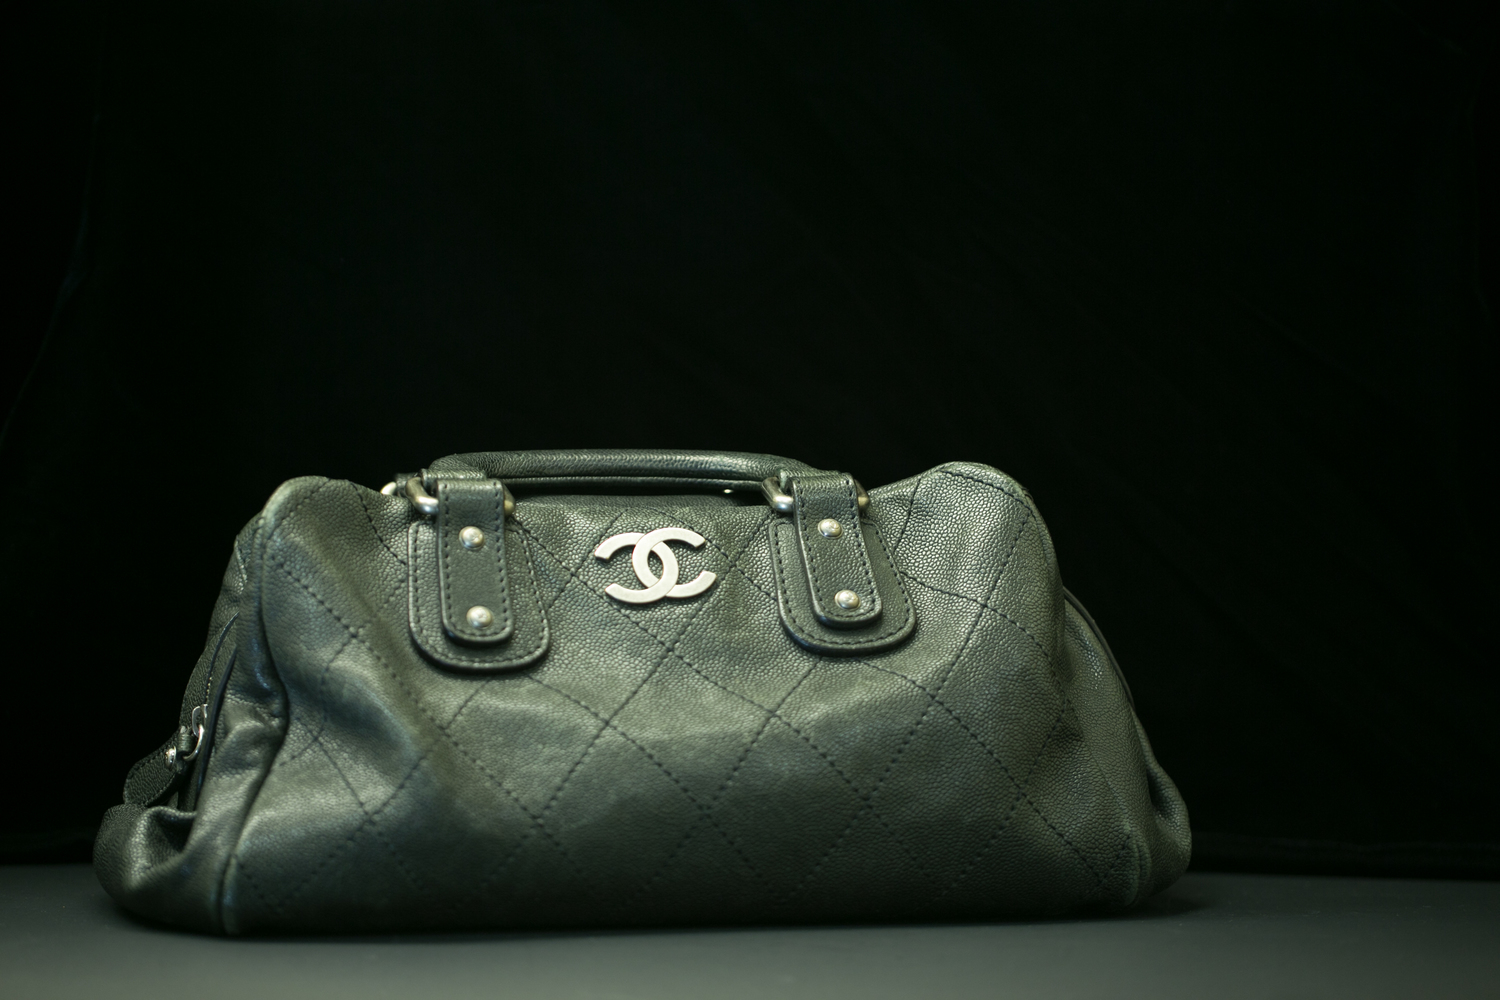 Authentic Chanel Doctor's bag, Women's Fashion, Bags & Wallets